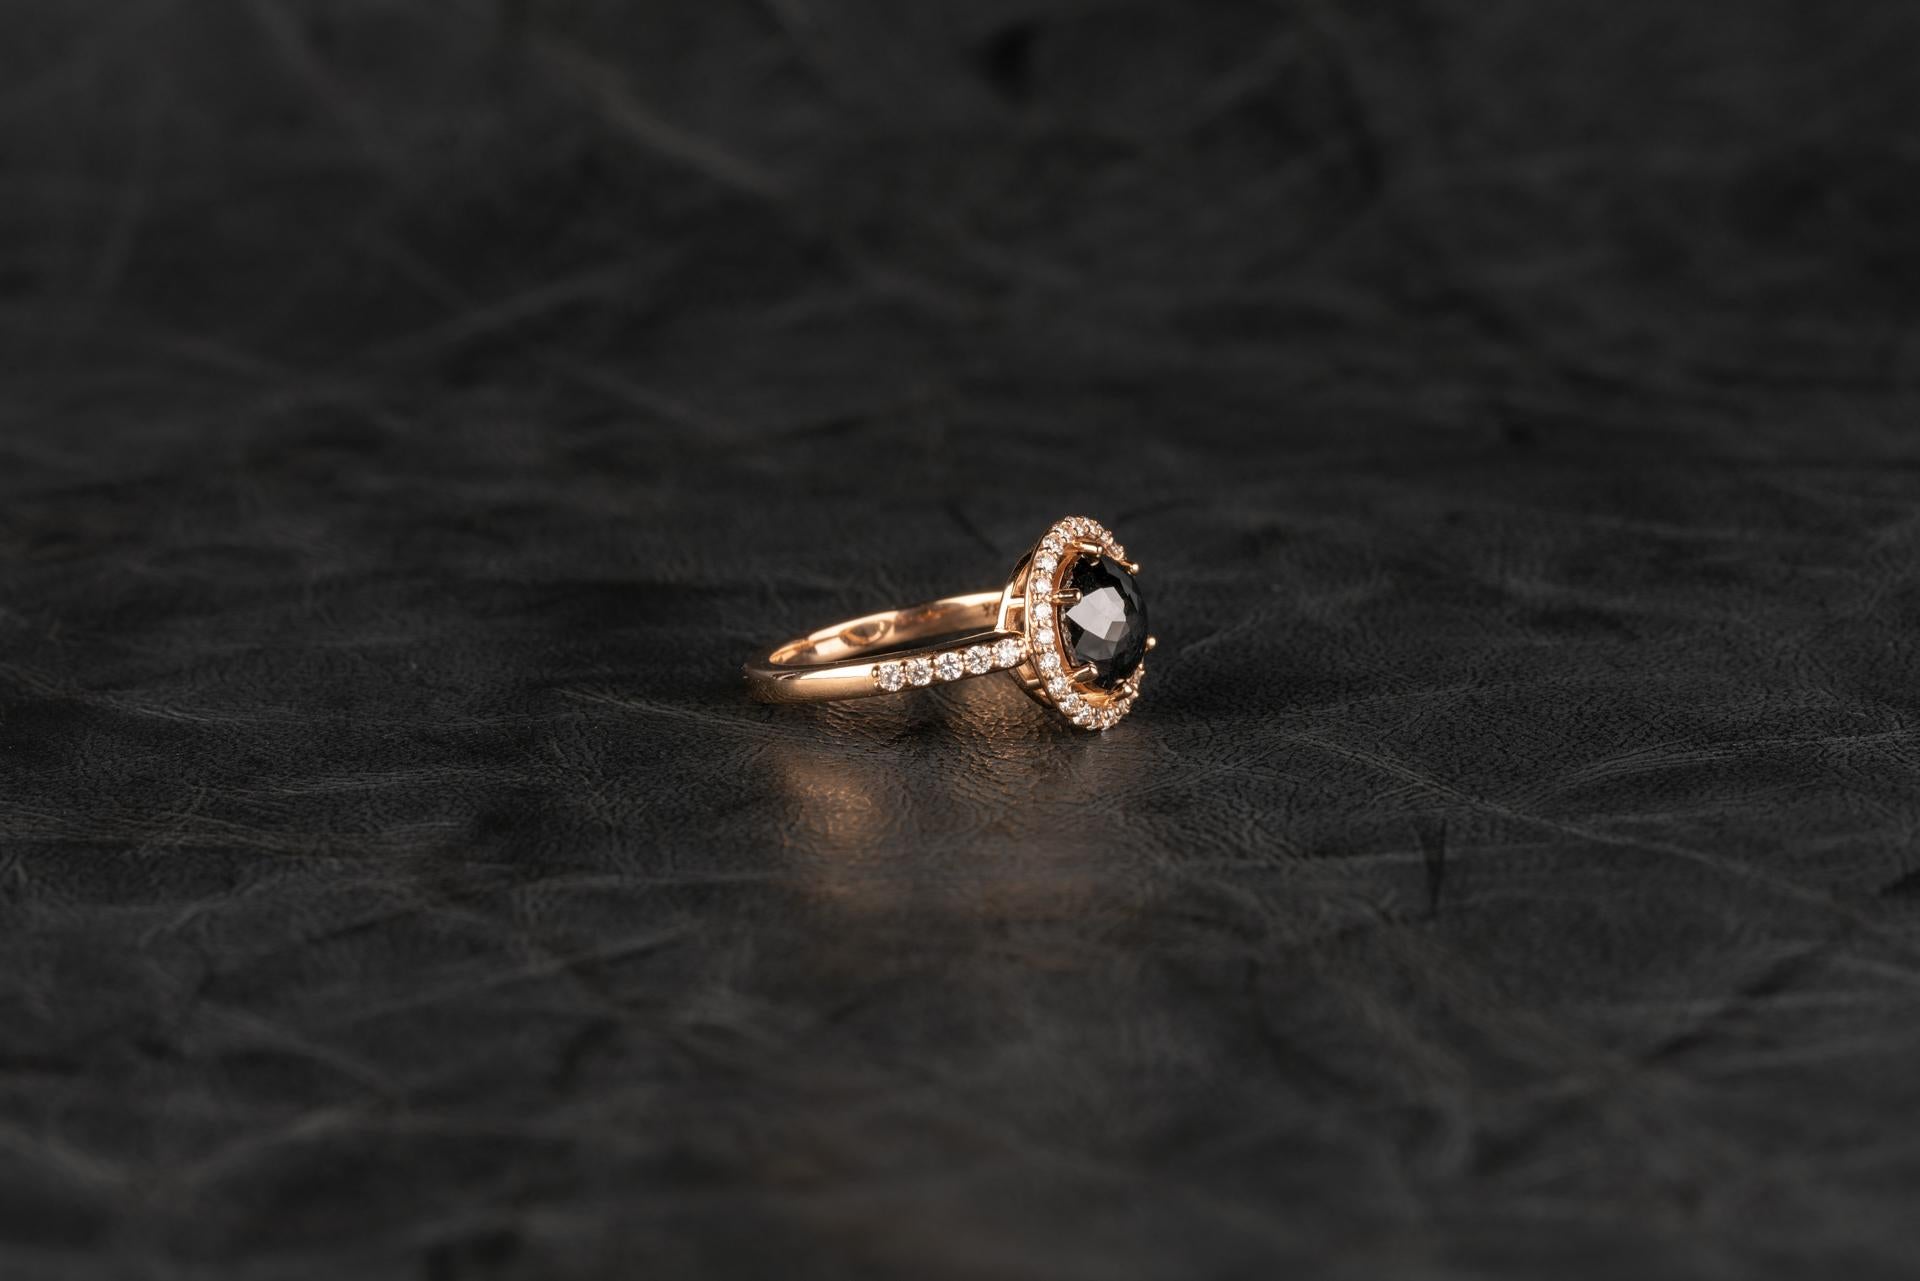 An 18k rose gold ring featuring one rose cut black diamond, 2.53 carats, and 0.37 total carat weight champagne diamonds in the halo and down the sides of the shank, ring size 7.  This ring was custom designed and made by llyn strong.